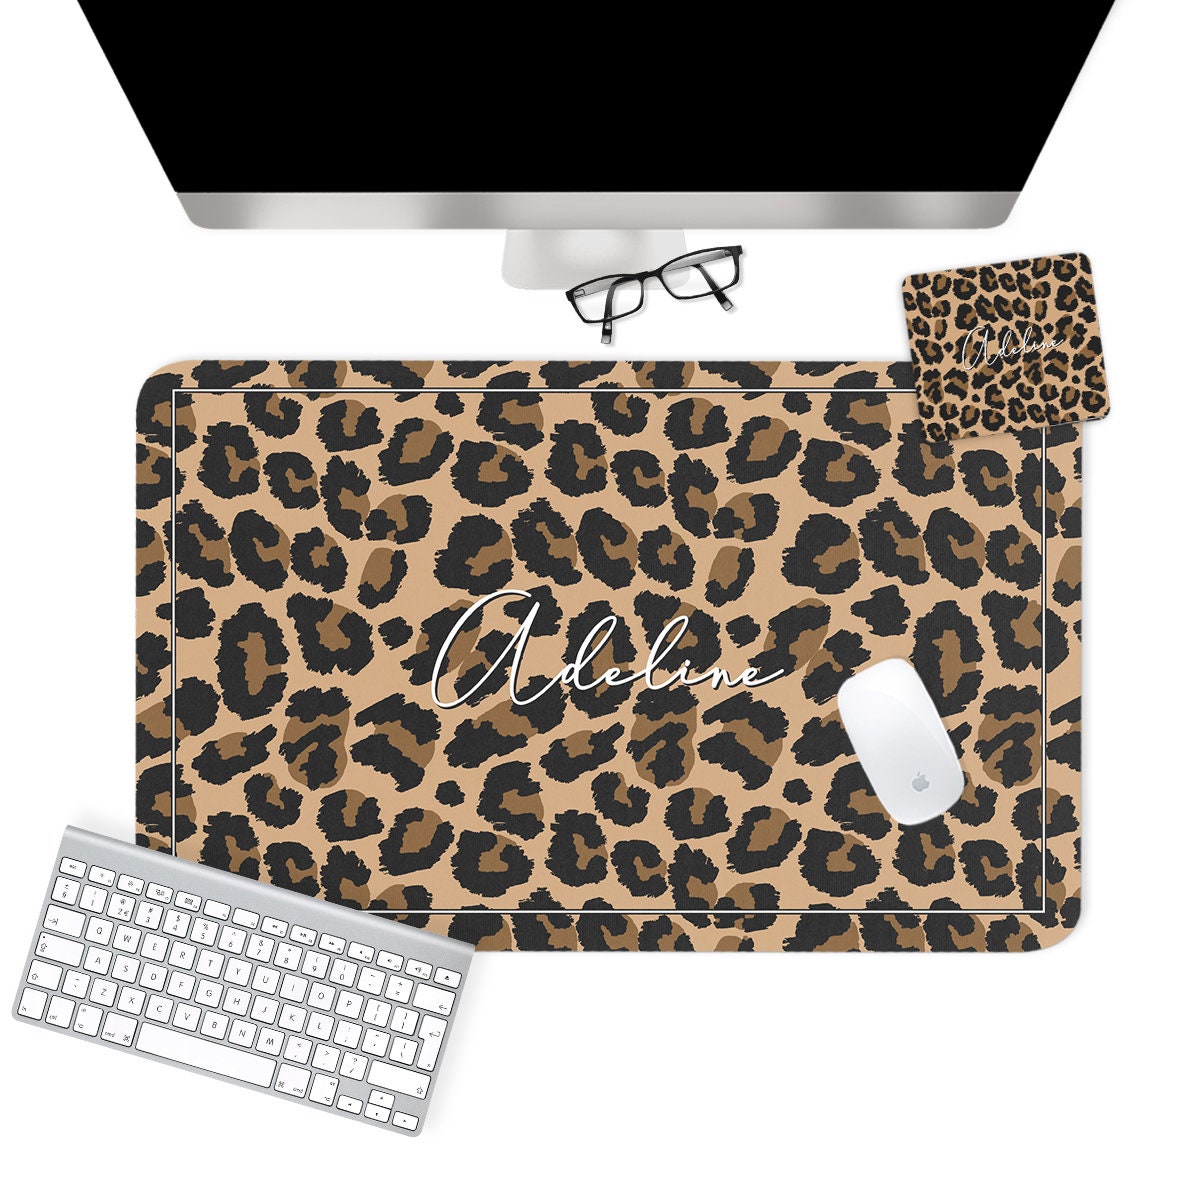 Mouse pad Pink Cheetah Mousepad Plants Office Decor for Women Men Desk  Accessories Leopard Animal Print Mousepad Gift for Coworker 9.5x7.9x0.12  Inch 